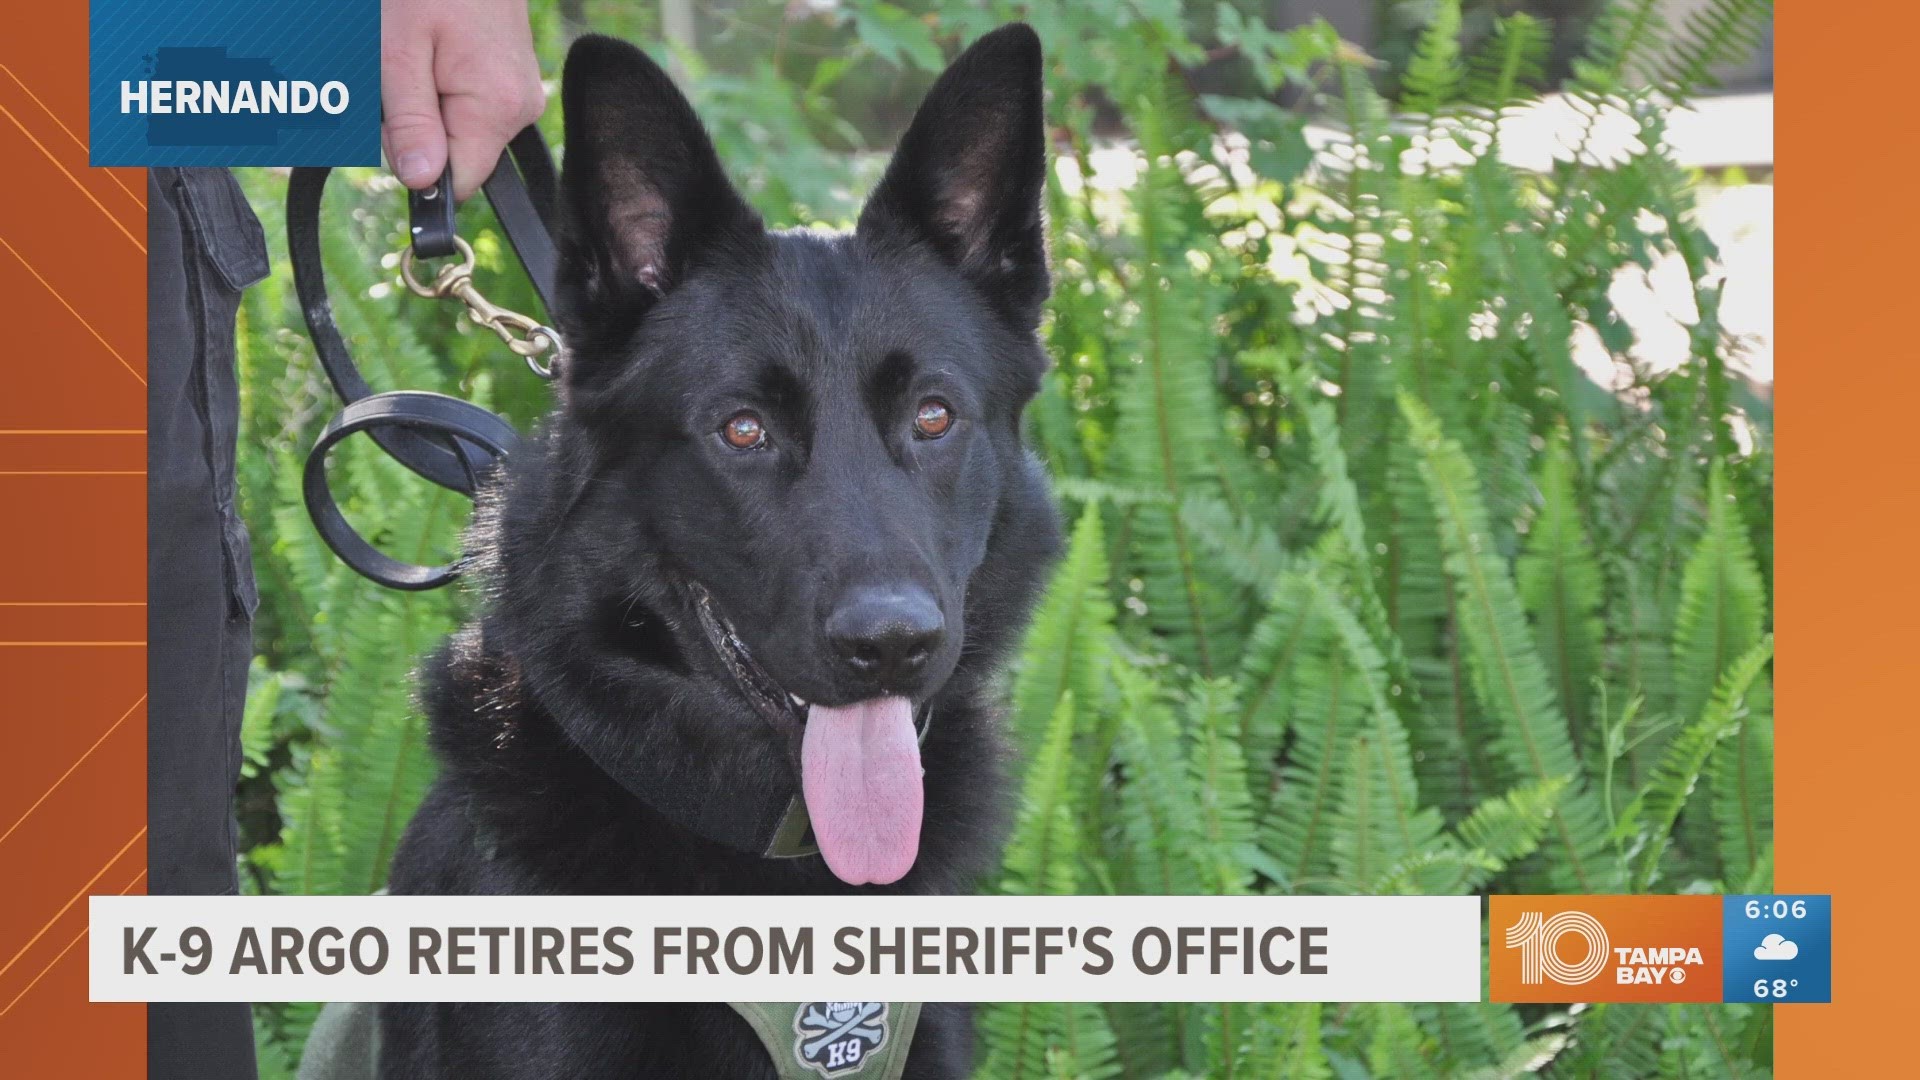 K-9 Argo helped with 84 arrests and found more than 18 kilograms of drugs, according to the sheriff's office